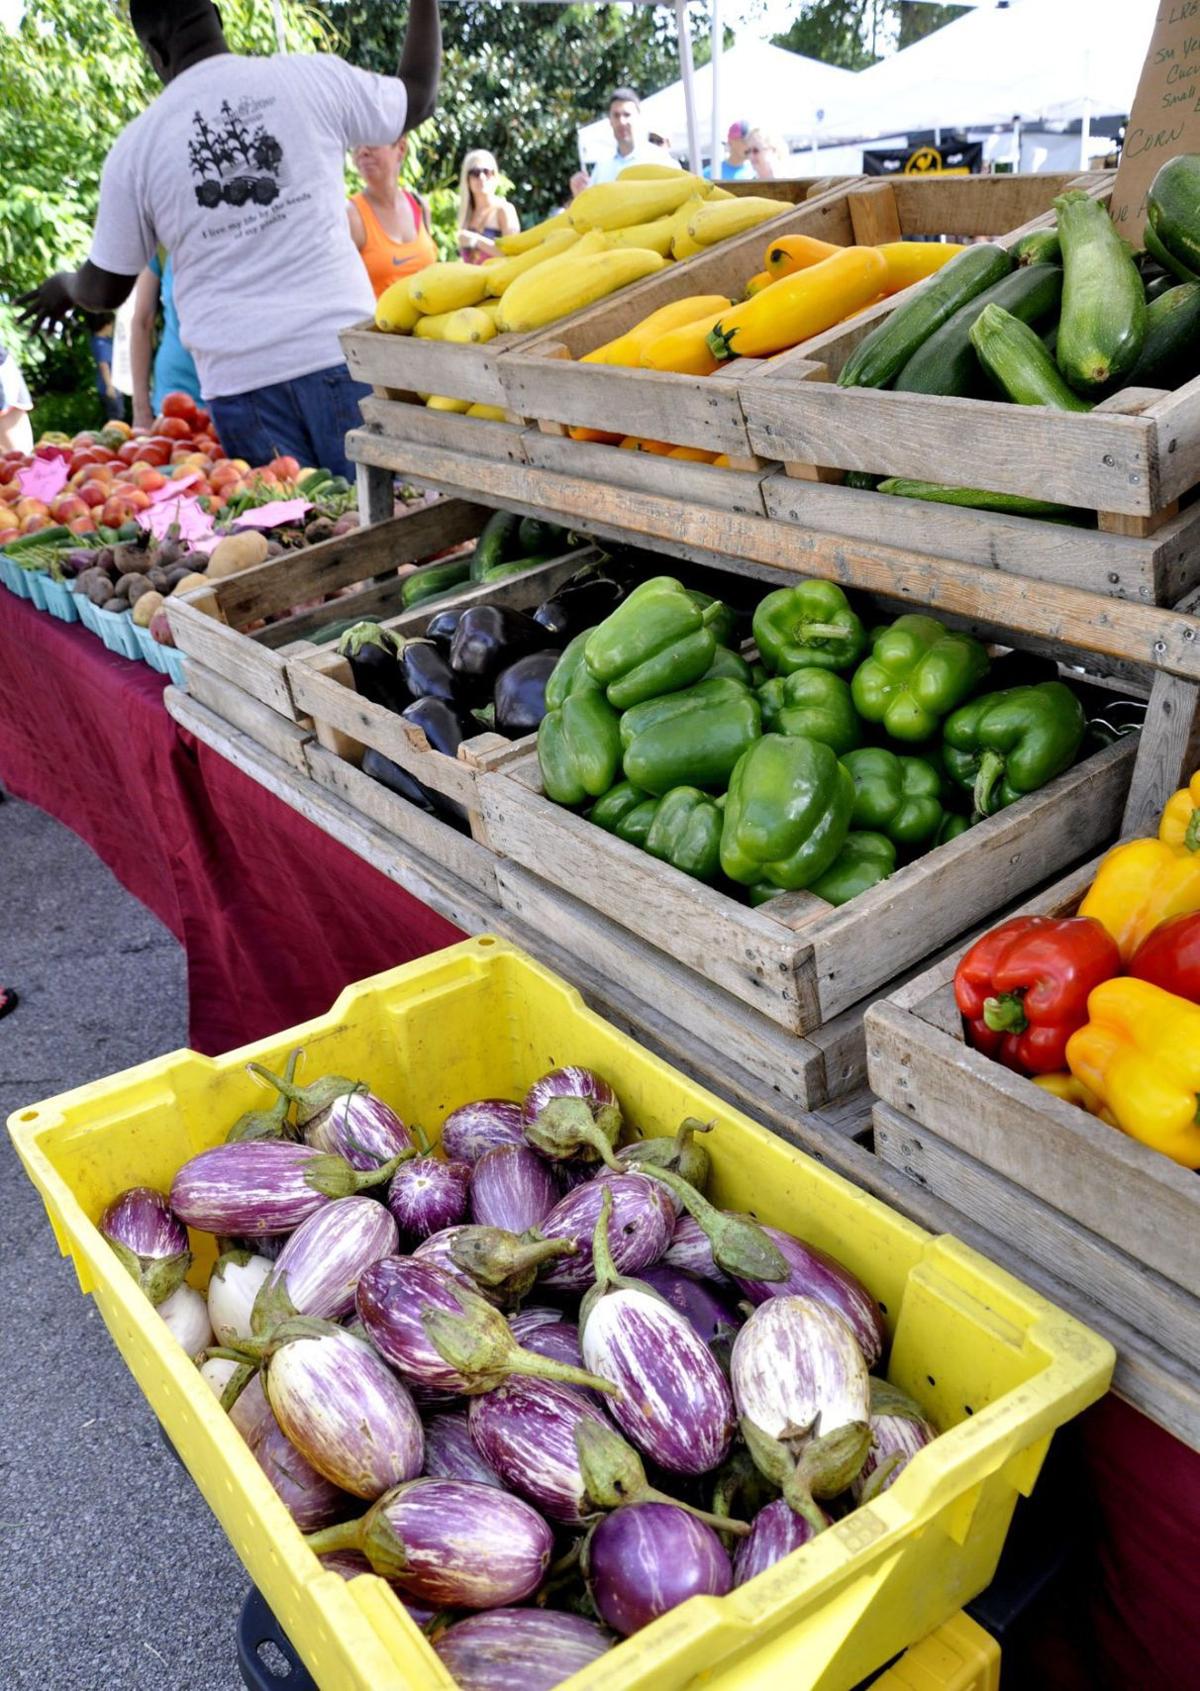 Where to find farmers markets in the St. Louis area | Food and cooking | www.semashow.com